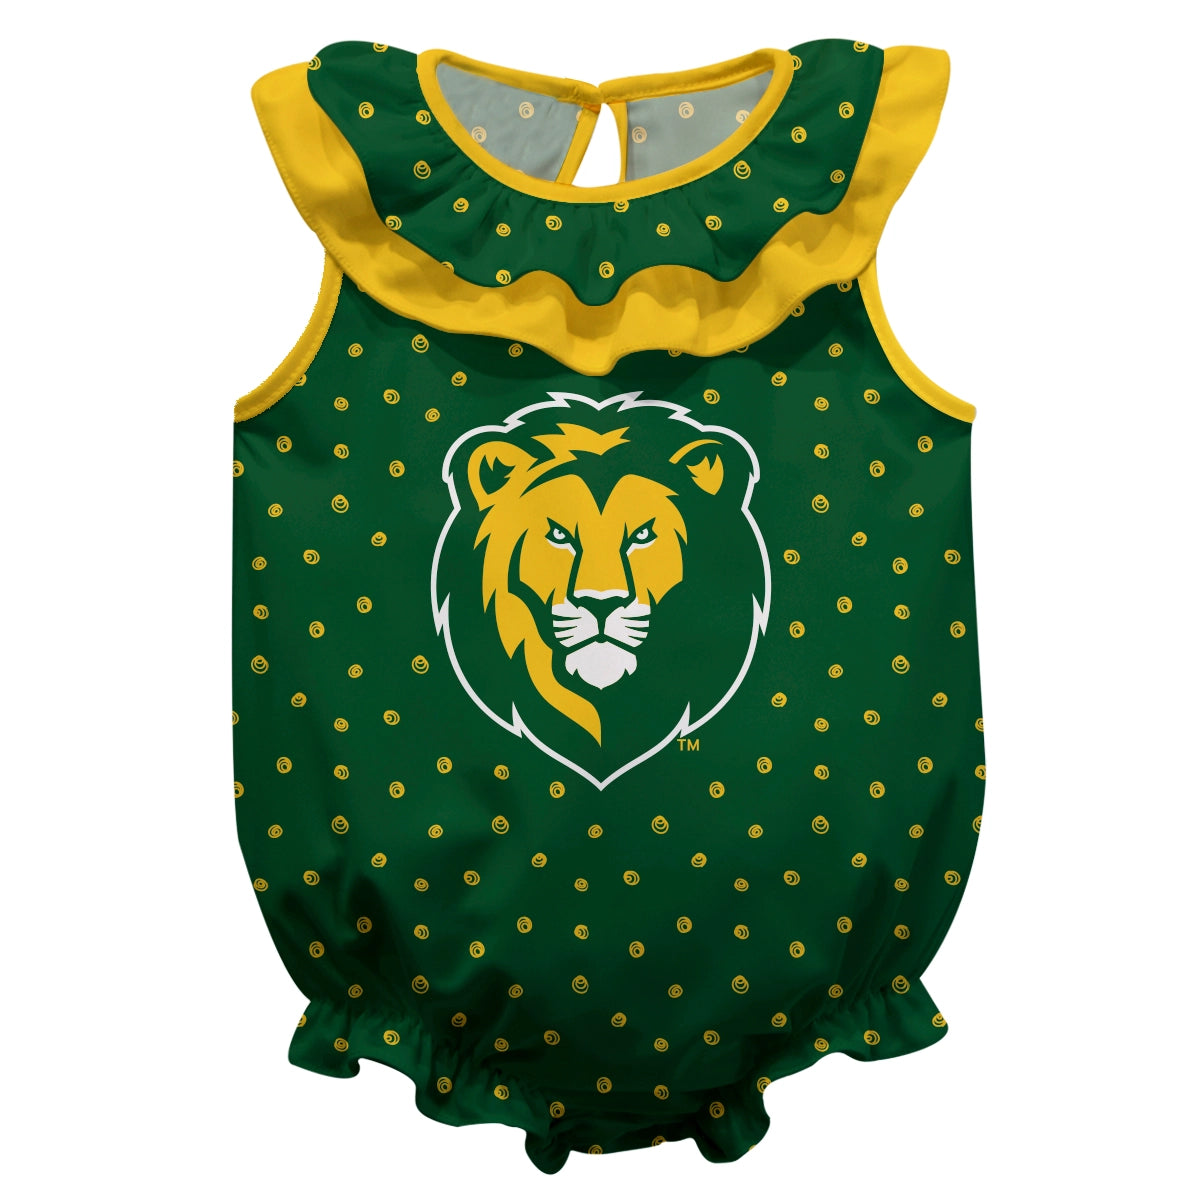 A Southeastern Lions Swirls green and yellow lion romper with polka dots, made by Vive La Fete.